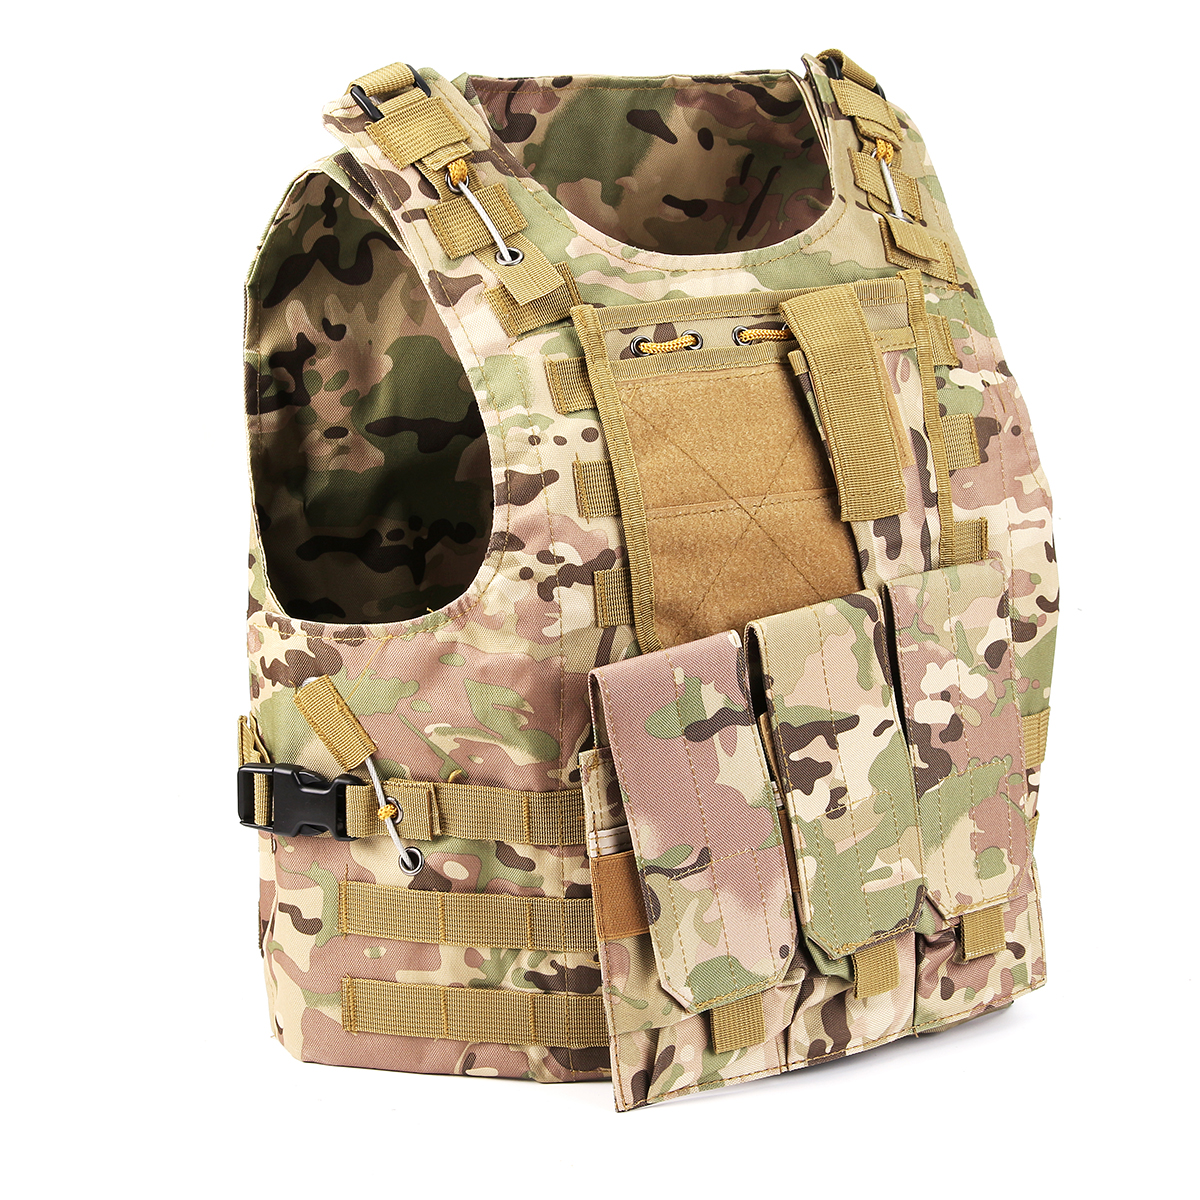 Military-Tactical-Vest-Molle-Combat-Assault-Plate-Carrier-Tactical-Vest-CS-Outdoor-Clothing-Hunting--1817235-2